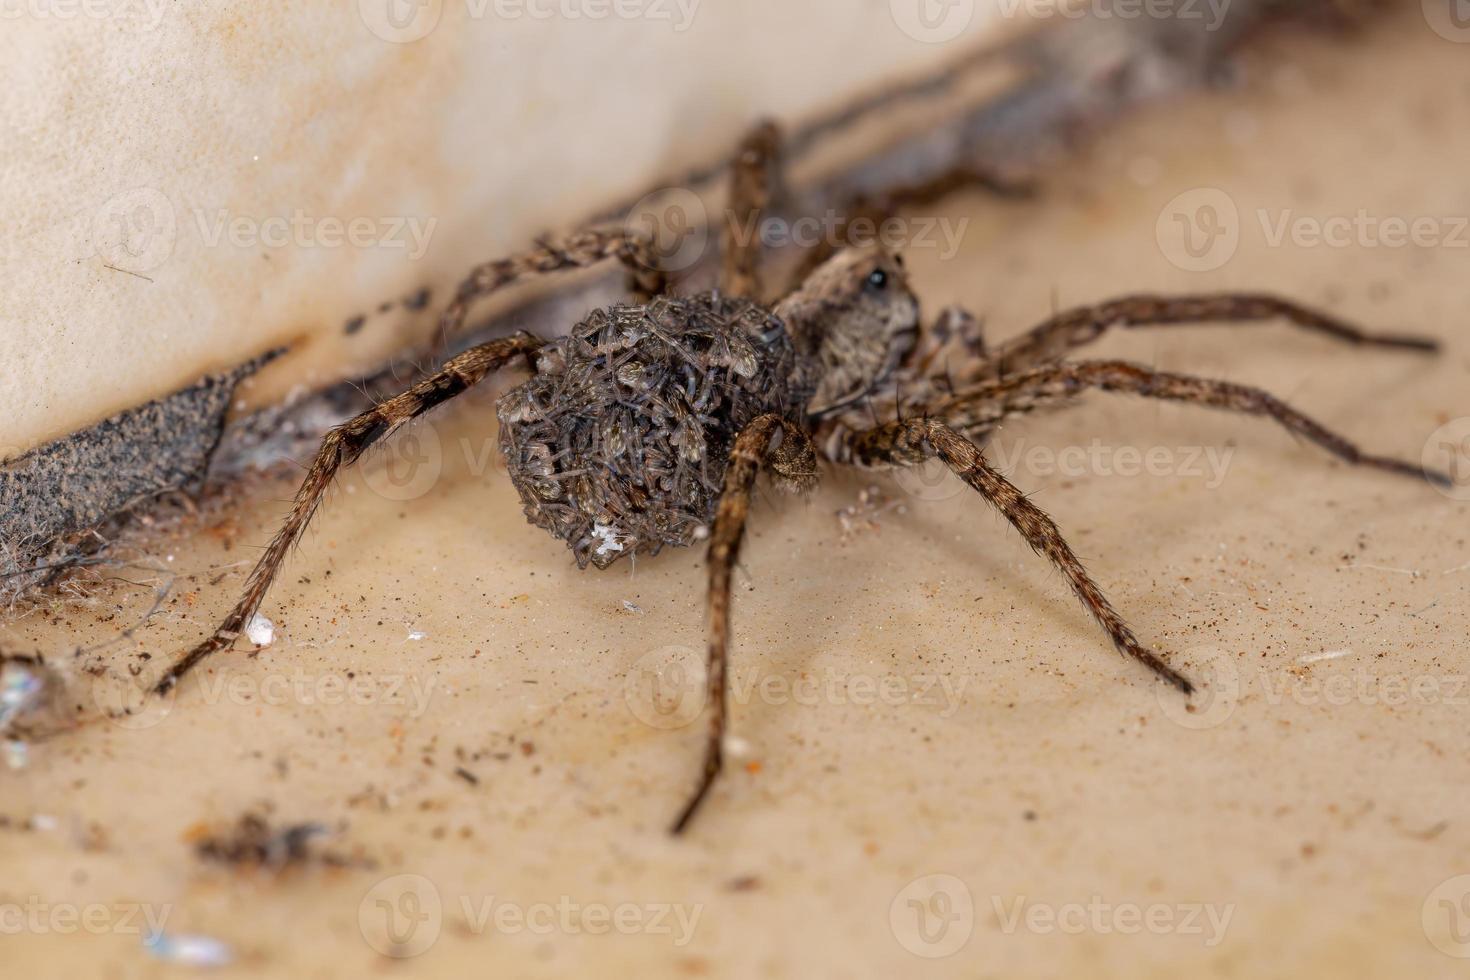 Wolf spider carrying the young photo